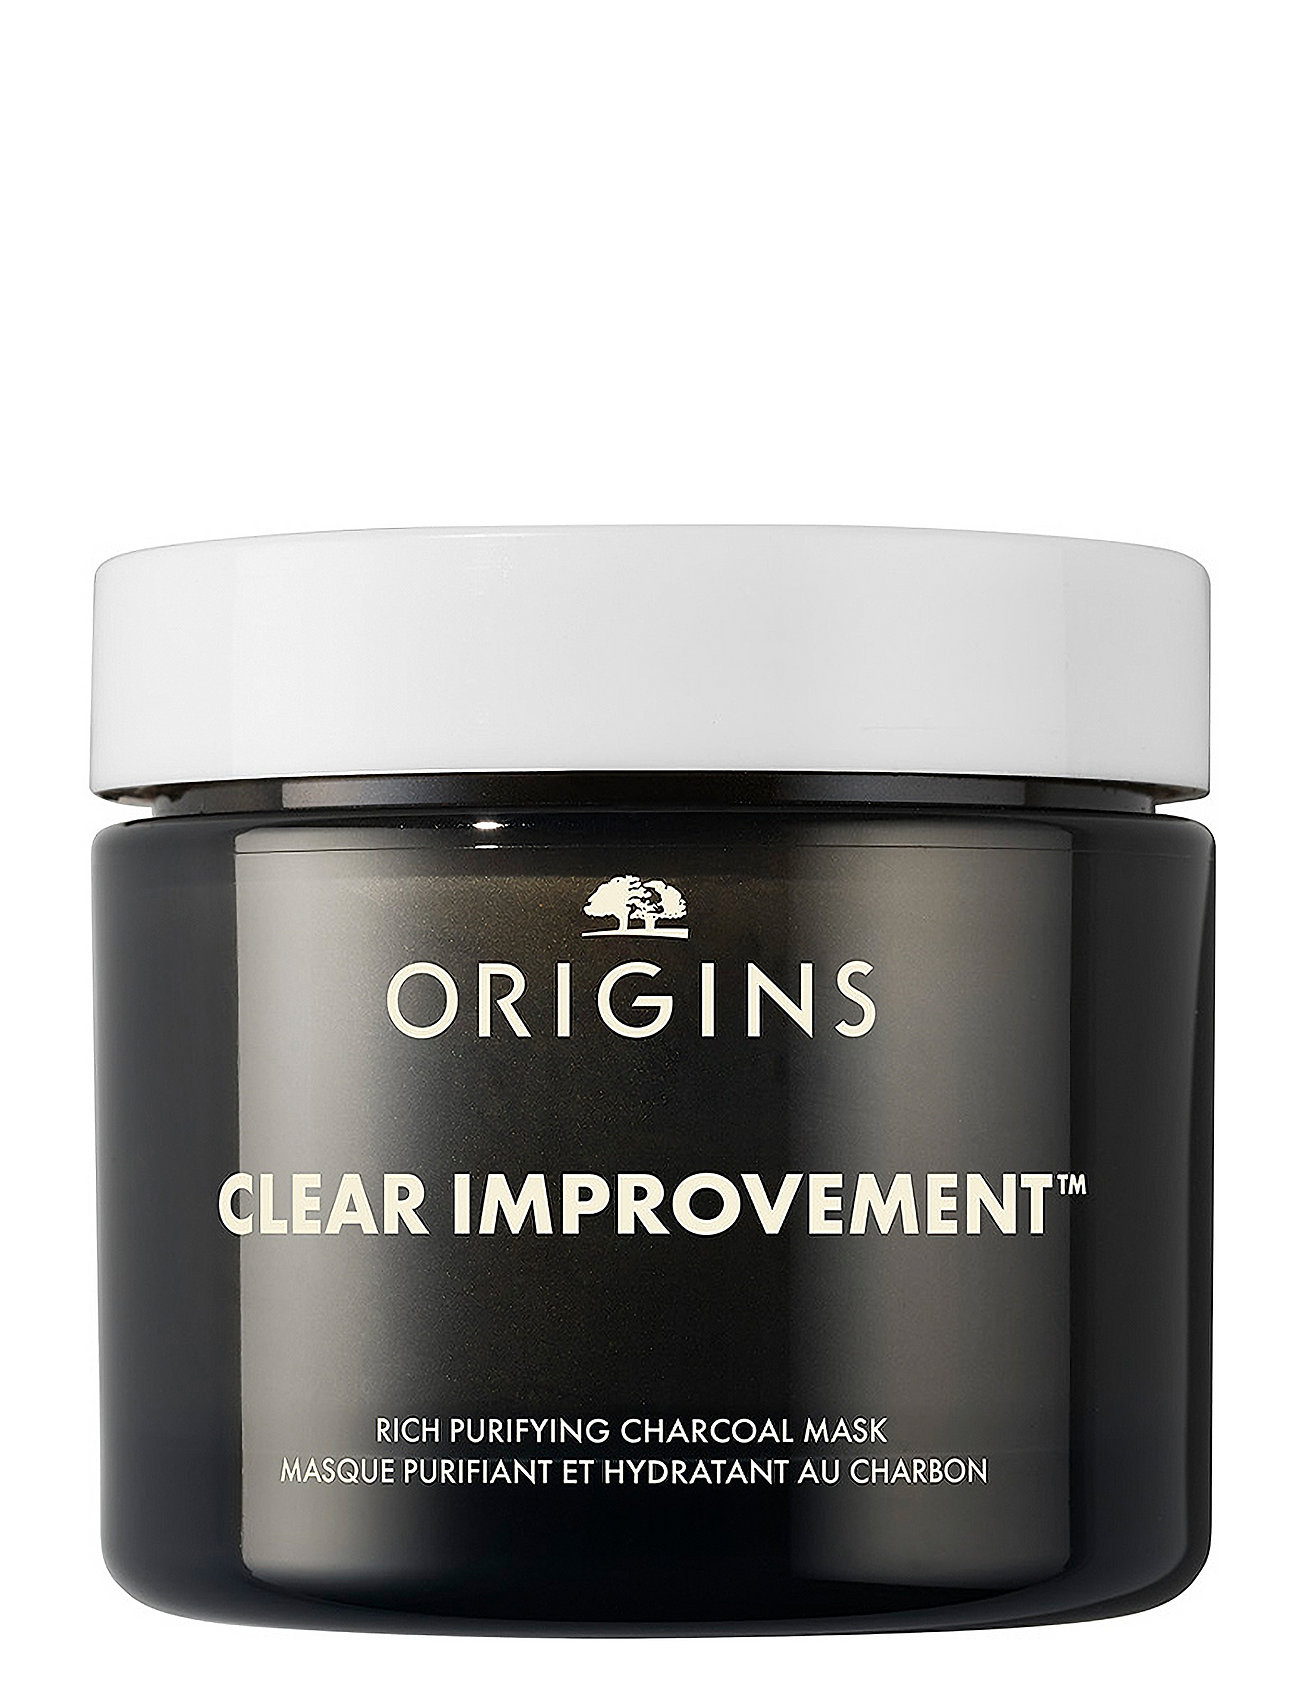 Clear Improvement Charcoal Chia Mask To Purify And Nourish Beauty Women Skin Care Face Face Masks Clay Mask Nude Origins